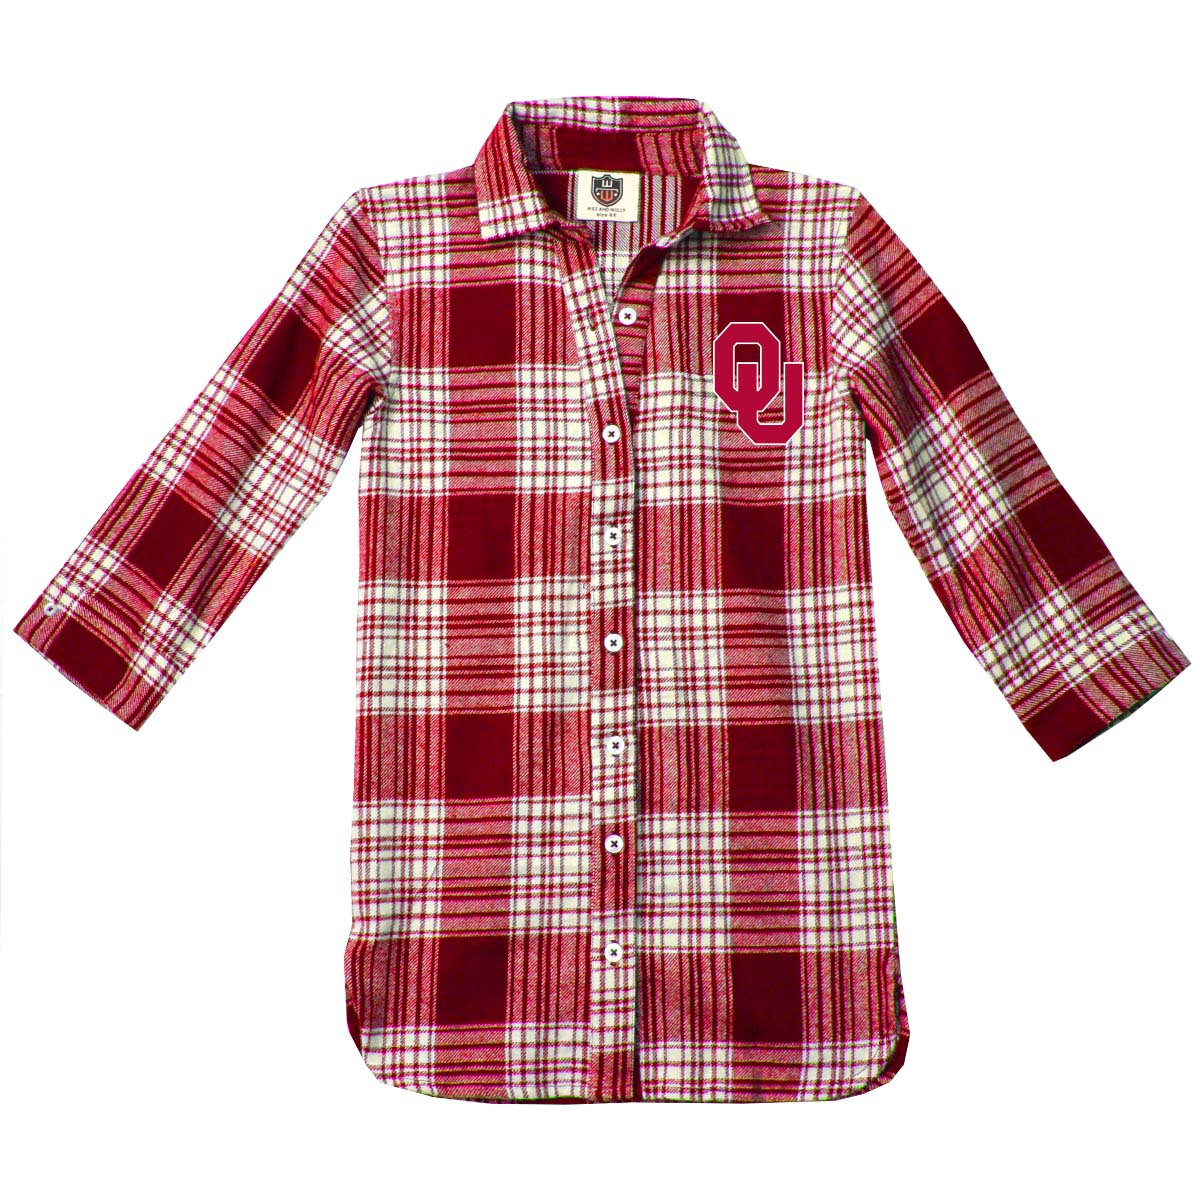 Wes & Willy Oklahoma Sooners Girl's Plaid Dress